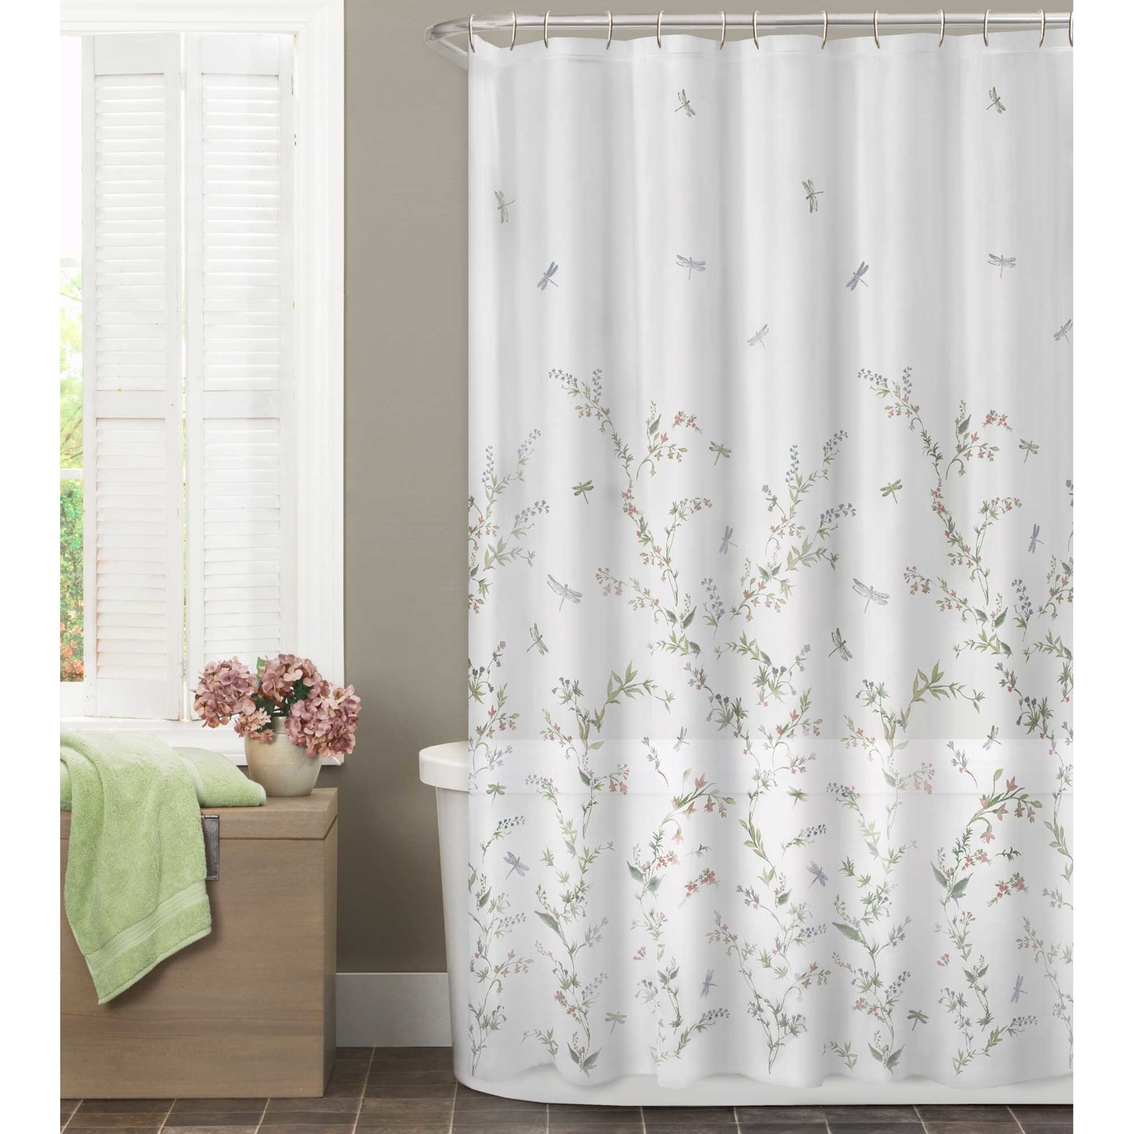 Maytex Dragonfly Garden Fabric Shower Curtain 70 x 72 in. - Image 2 of 6